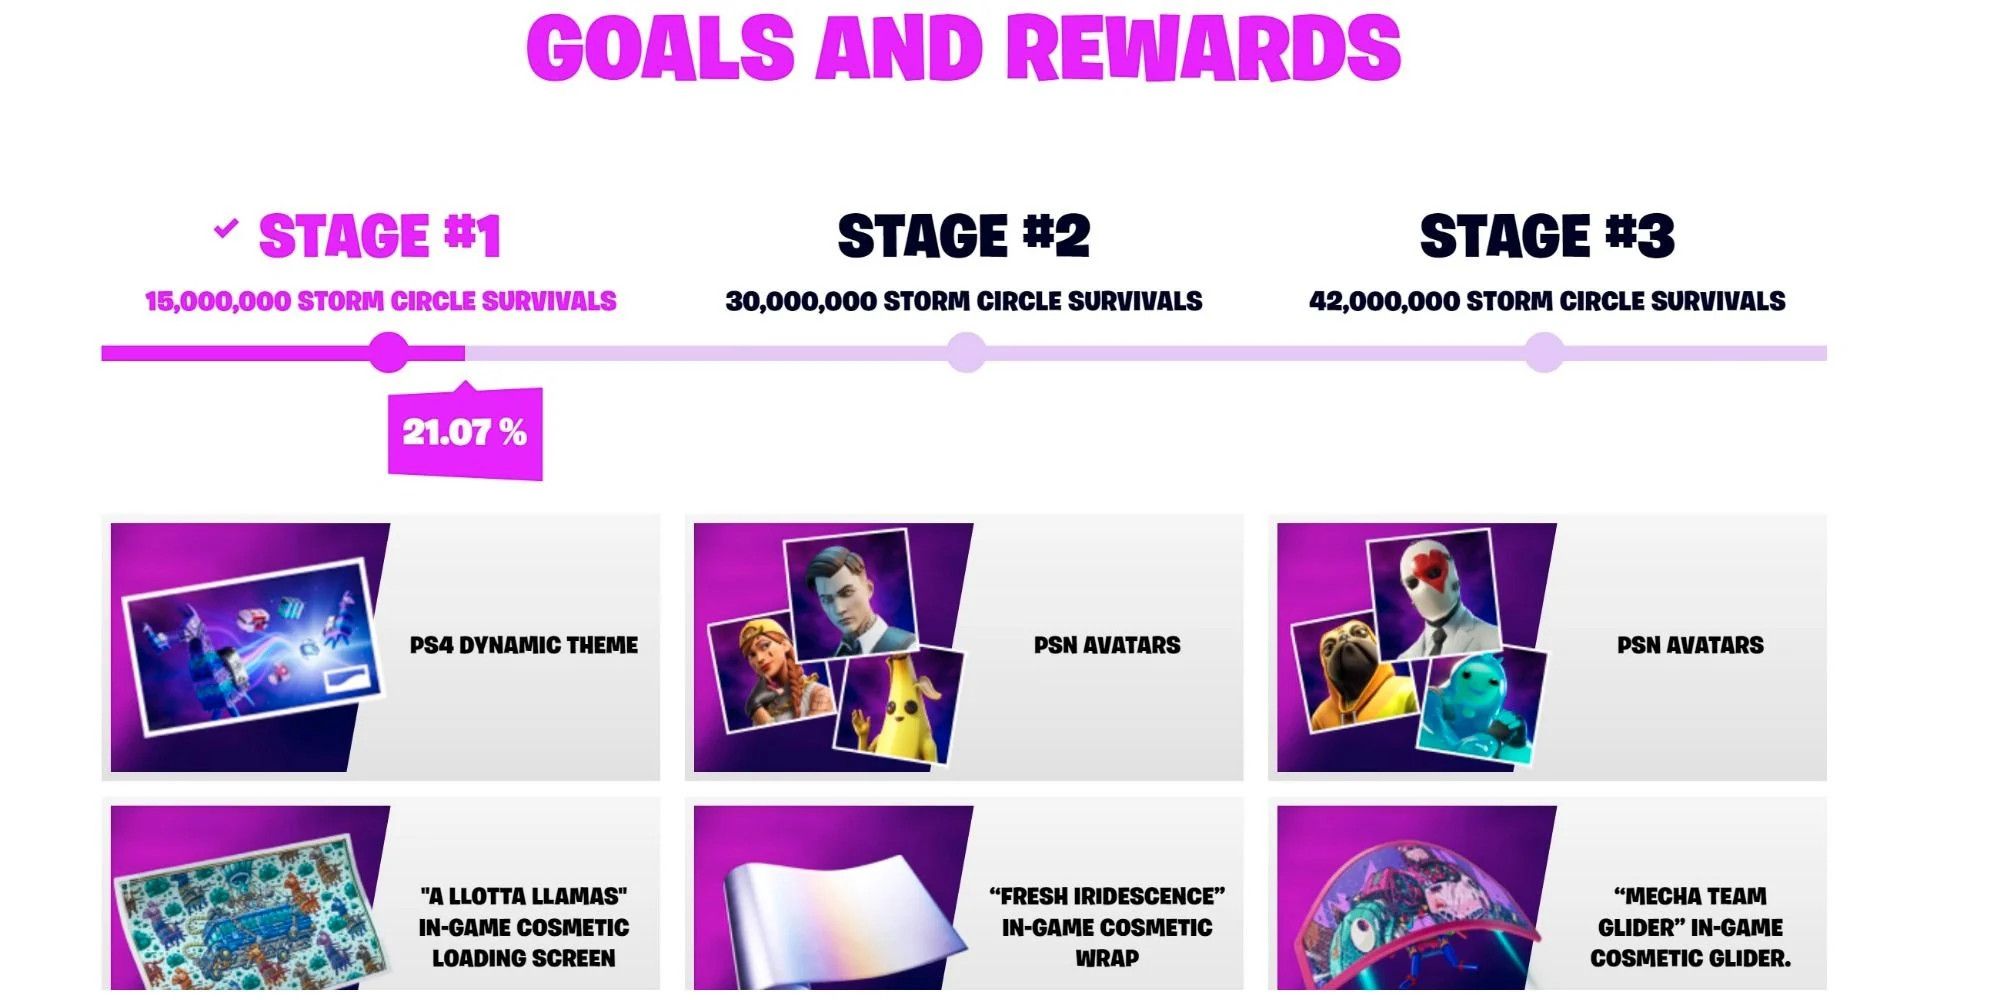 How To Complete Supply Llama PlayStation Event in Fortnite